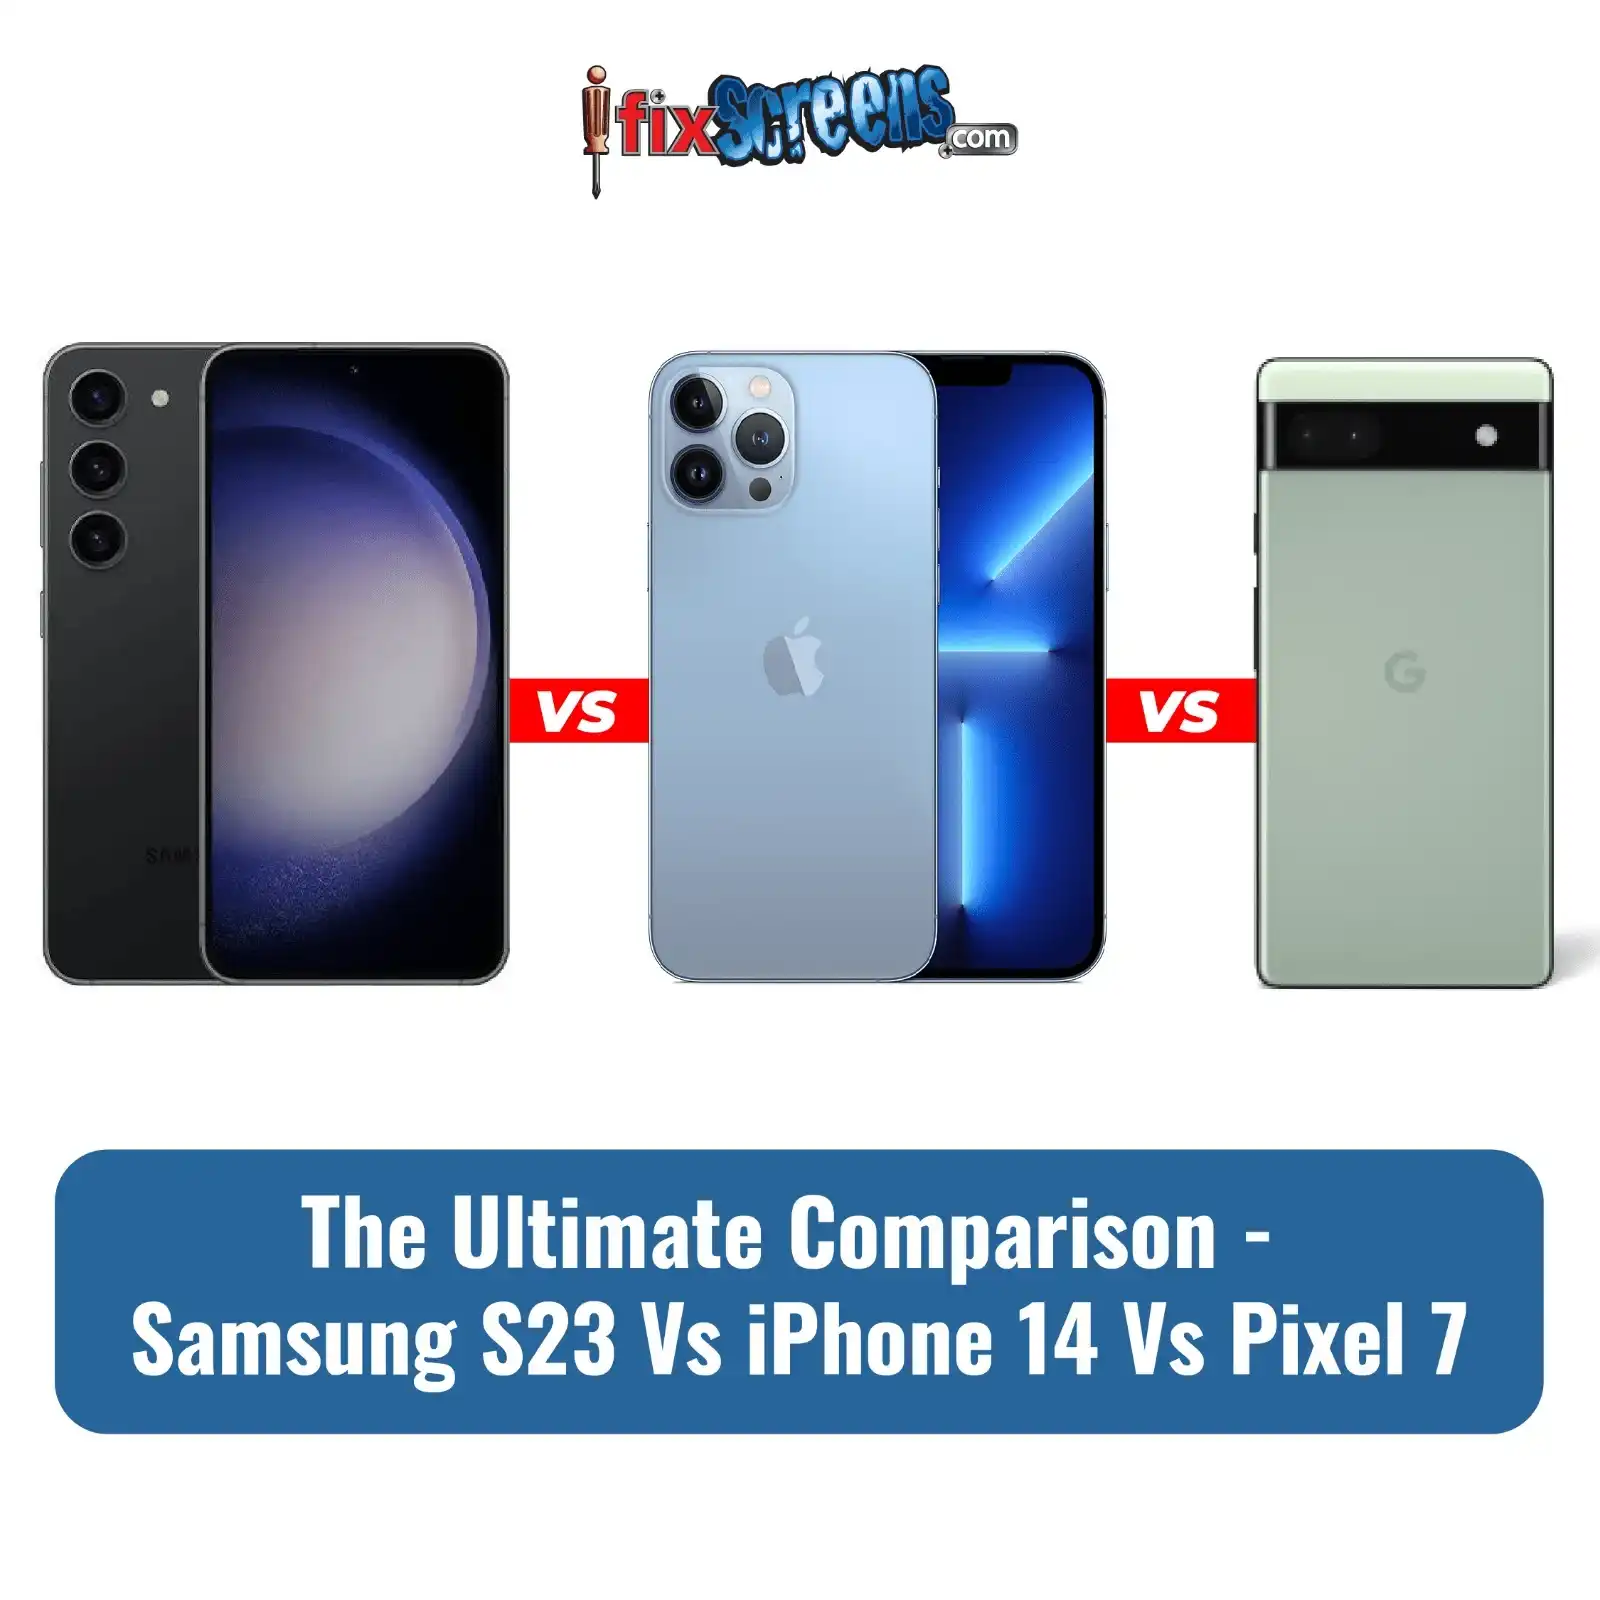 Samsung S23 Vs. Iphone 14 Vs. Pixel 7: Which Is The Ultimate Smartphone?